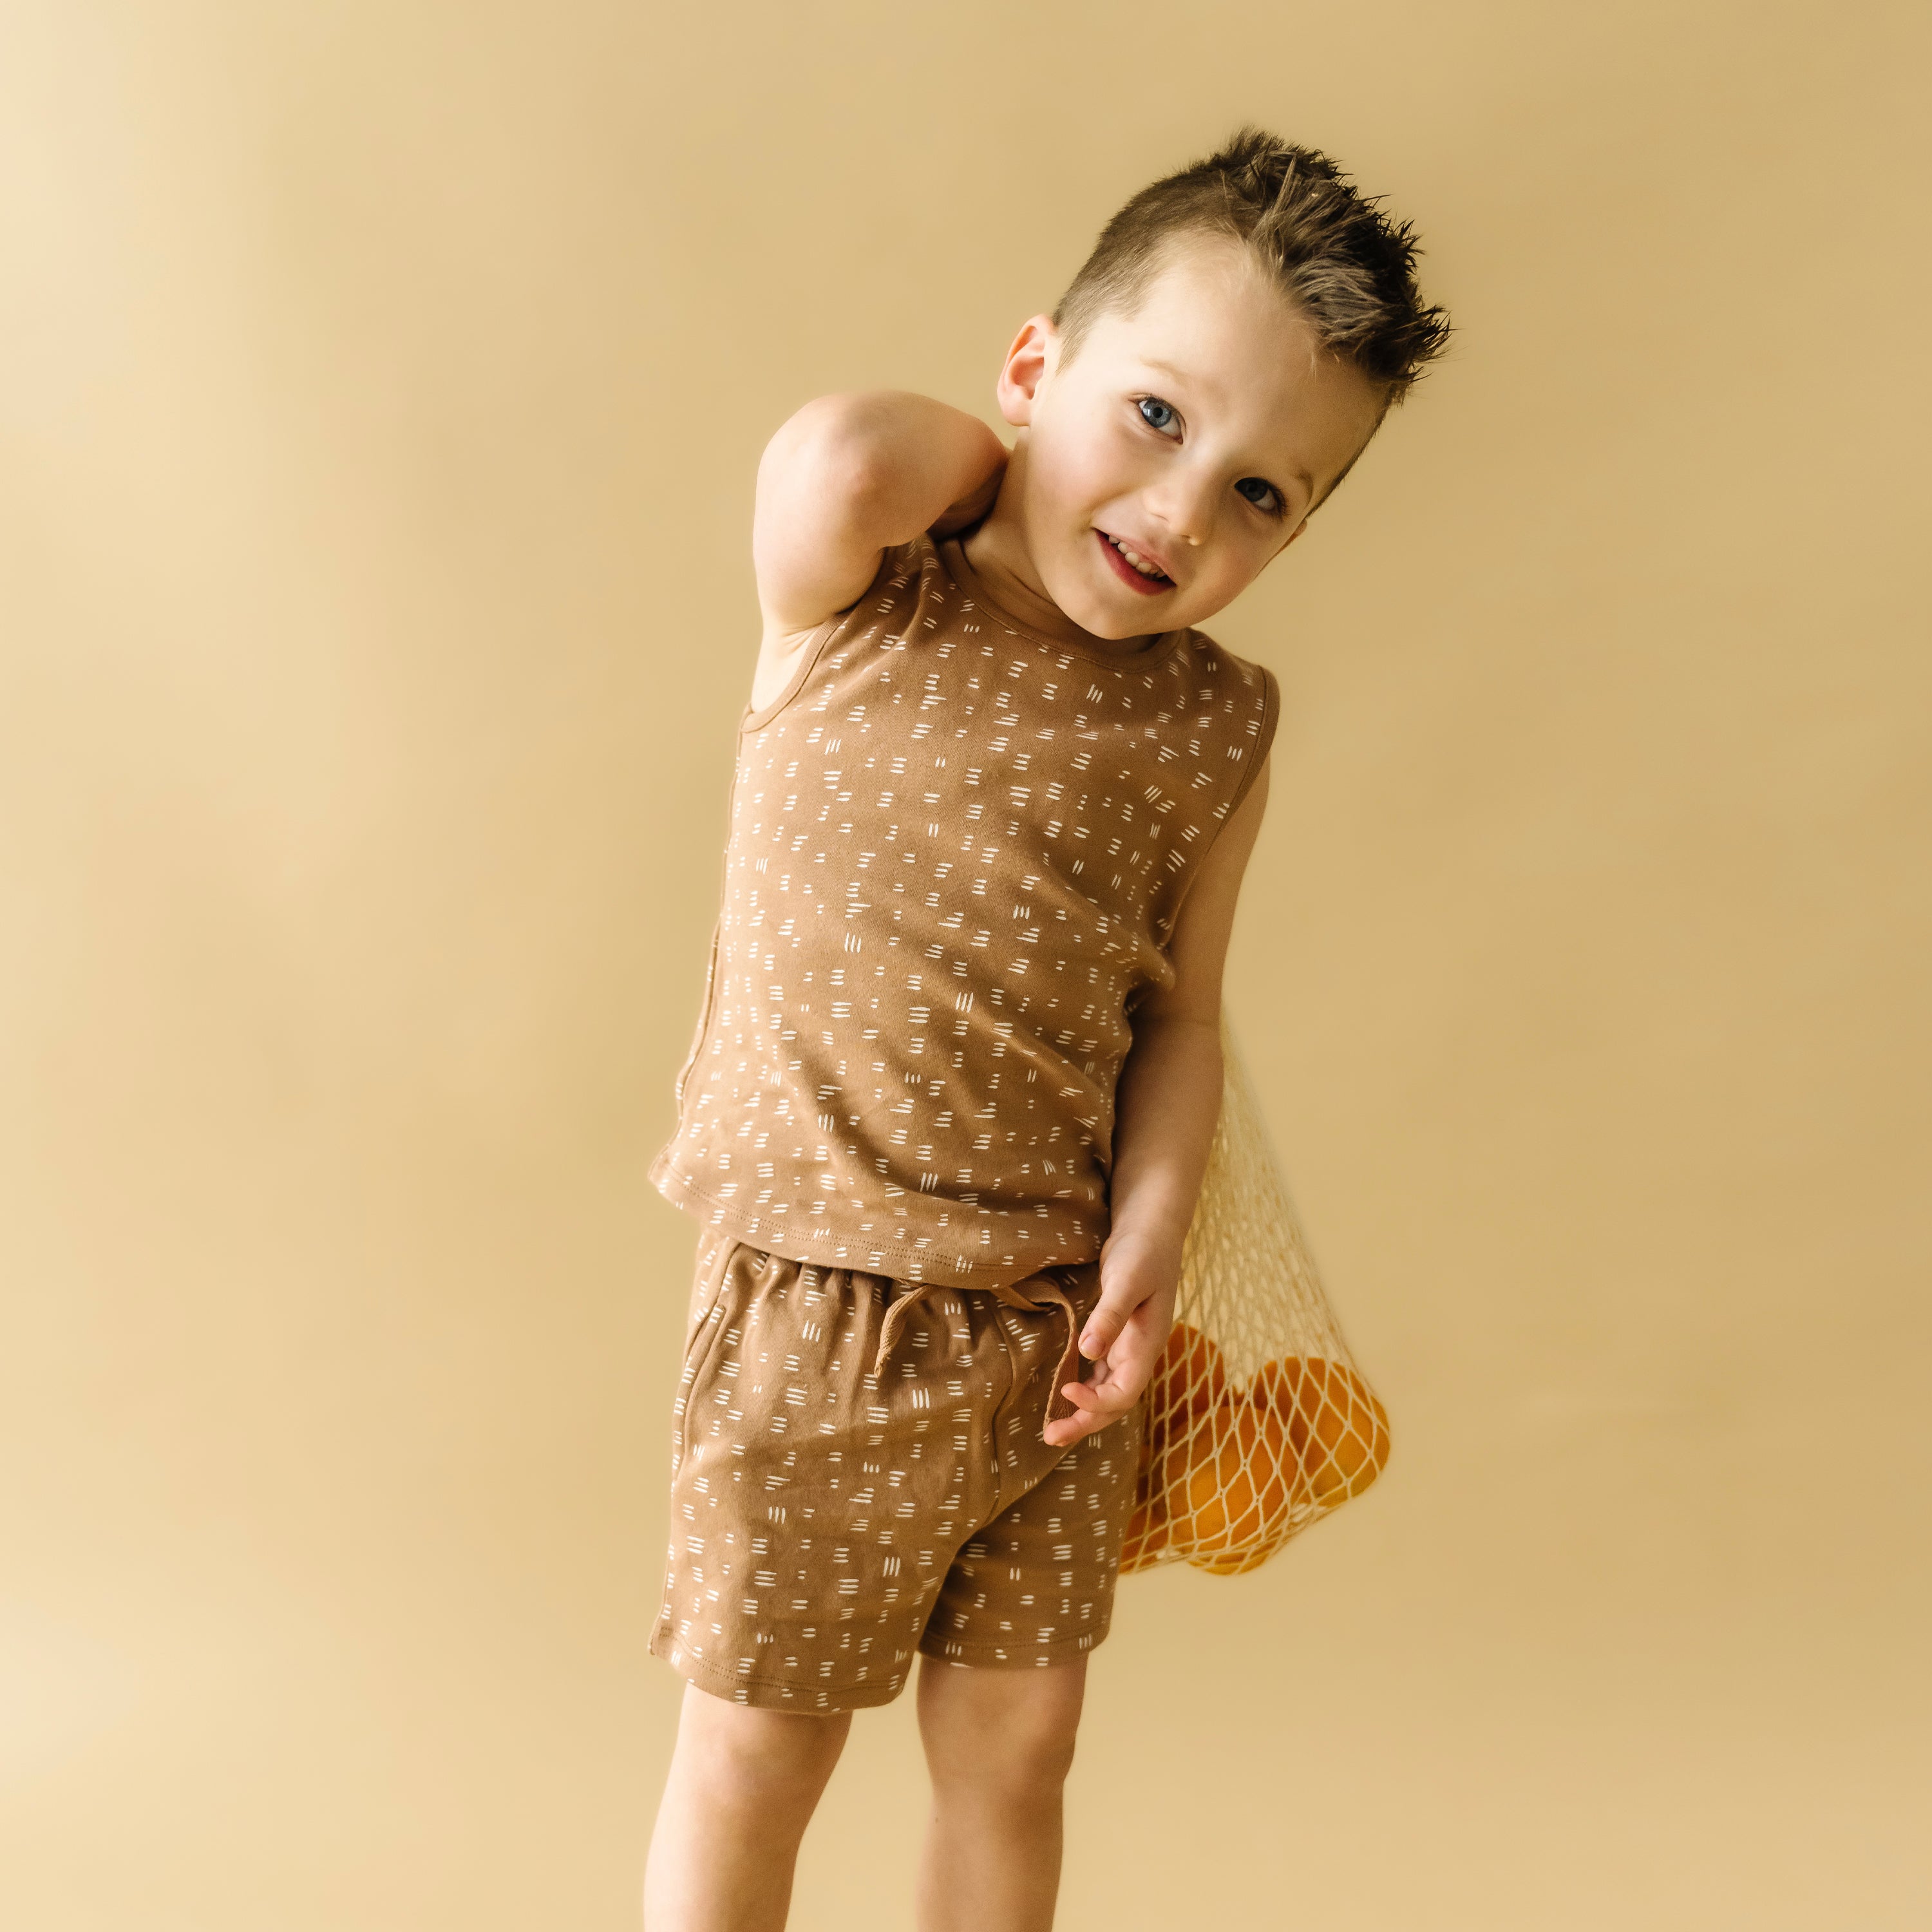 A young boy in a matching brown Organic Tee & Shorts - Strokes set from Organic Kids, playfully posing with one hand on his hip against a beige background. His hair is spiked up.